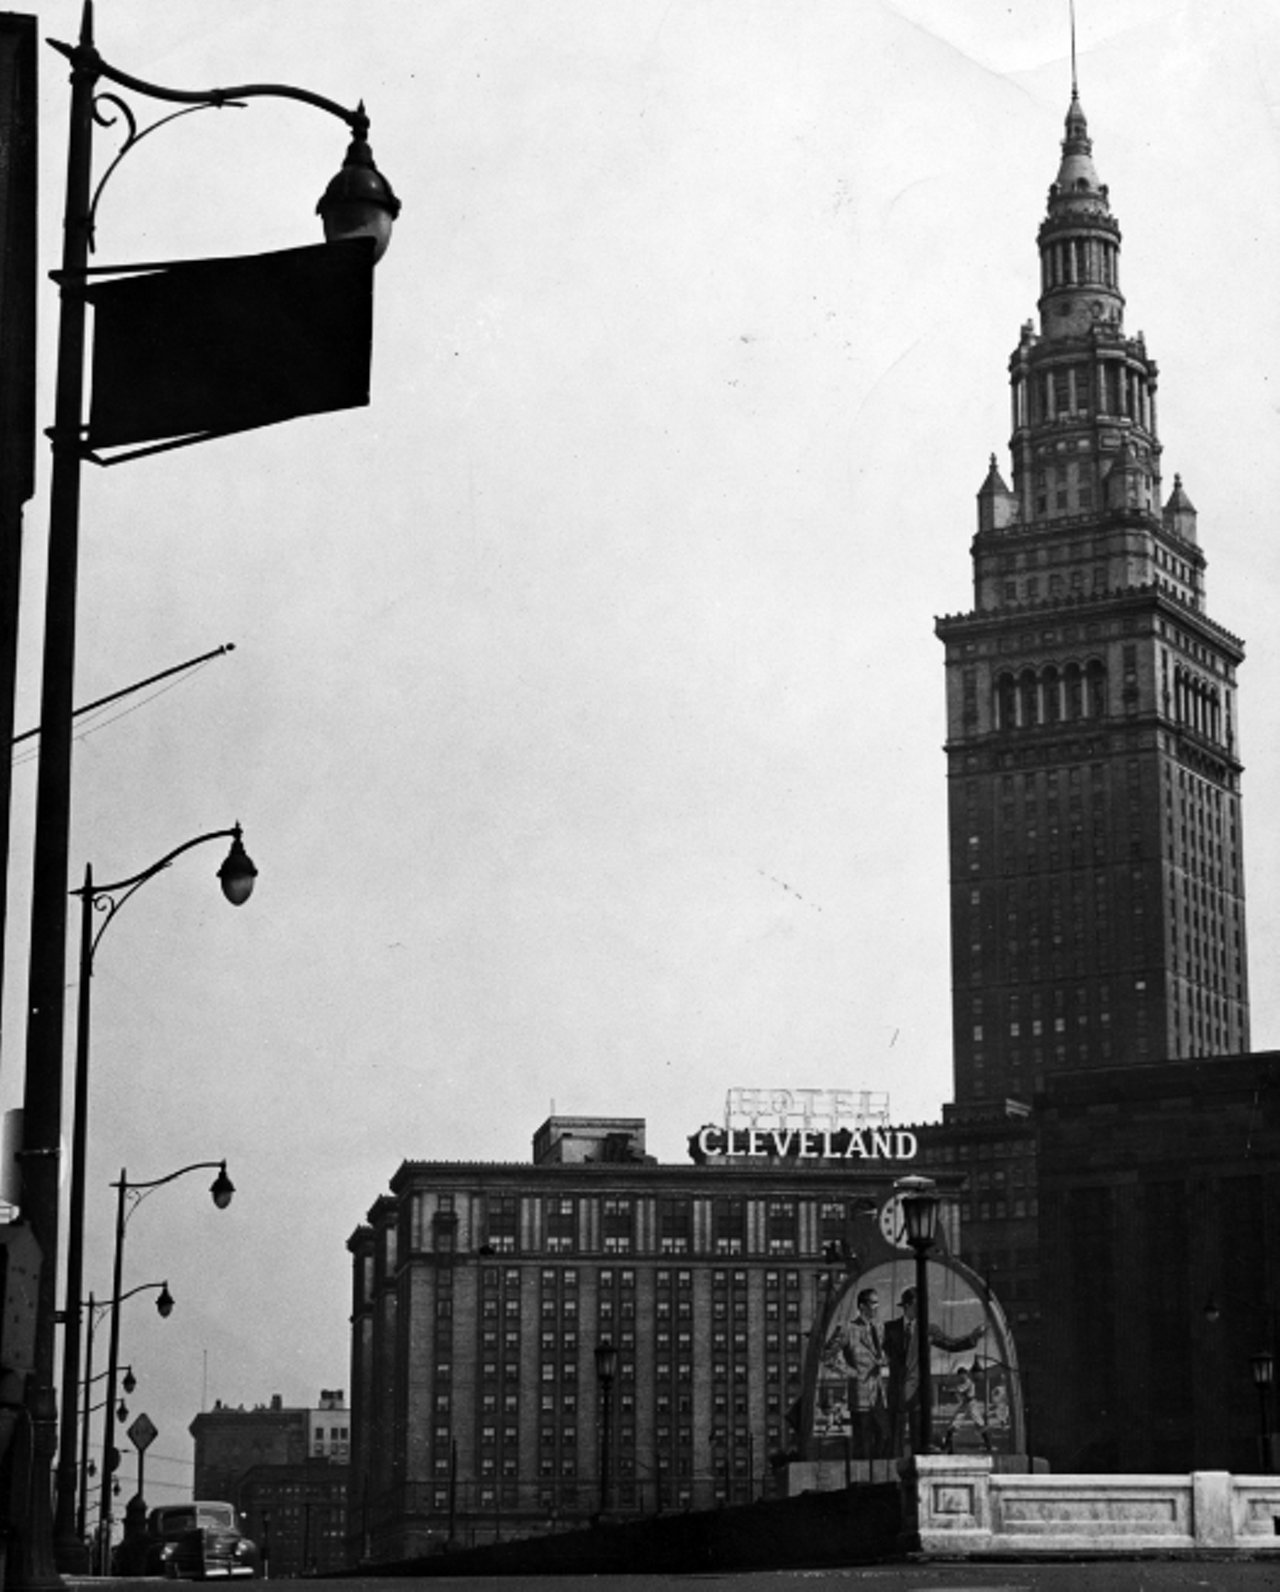 A view of the Hotel Cleveland from Superior Ave. and West 6th.